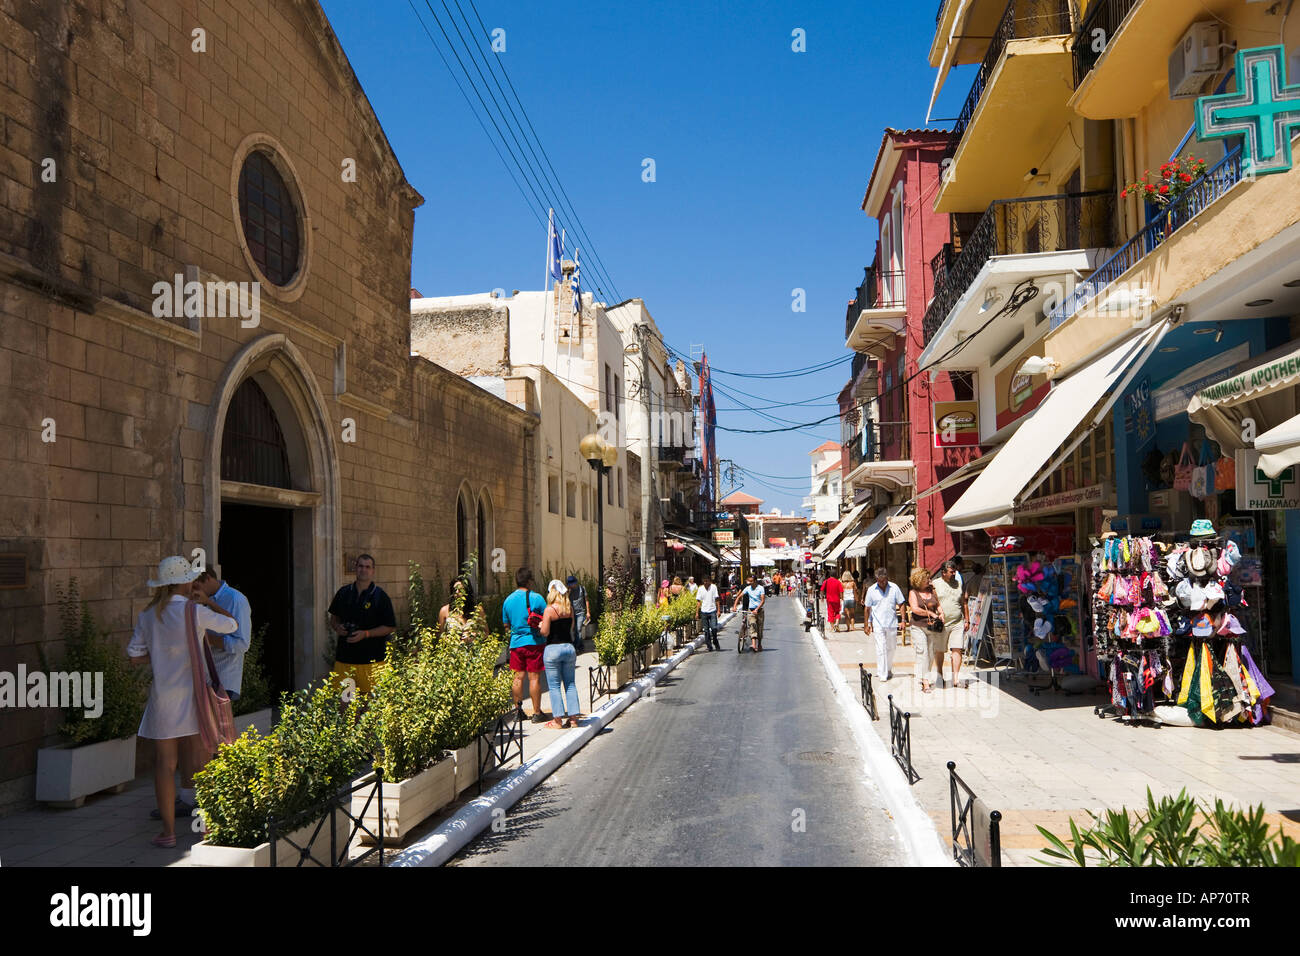 Shops in Old Town, Chania, North West Coast, Crete, Greece Stock Photo